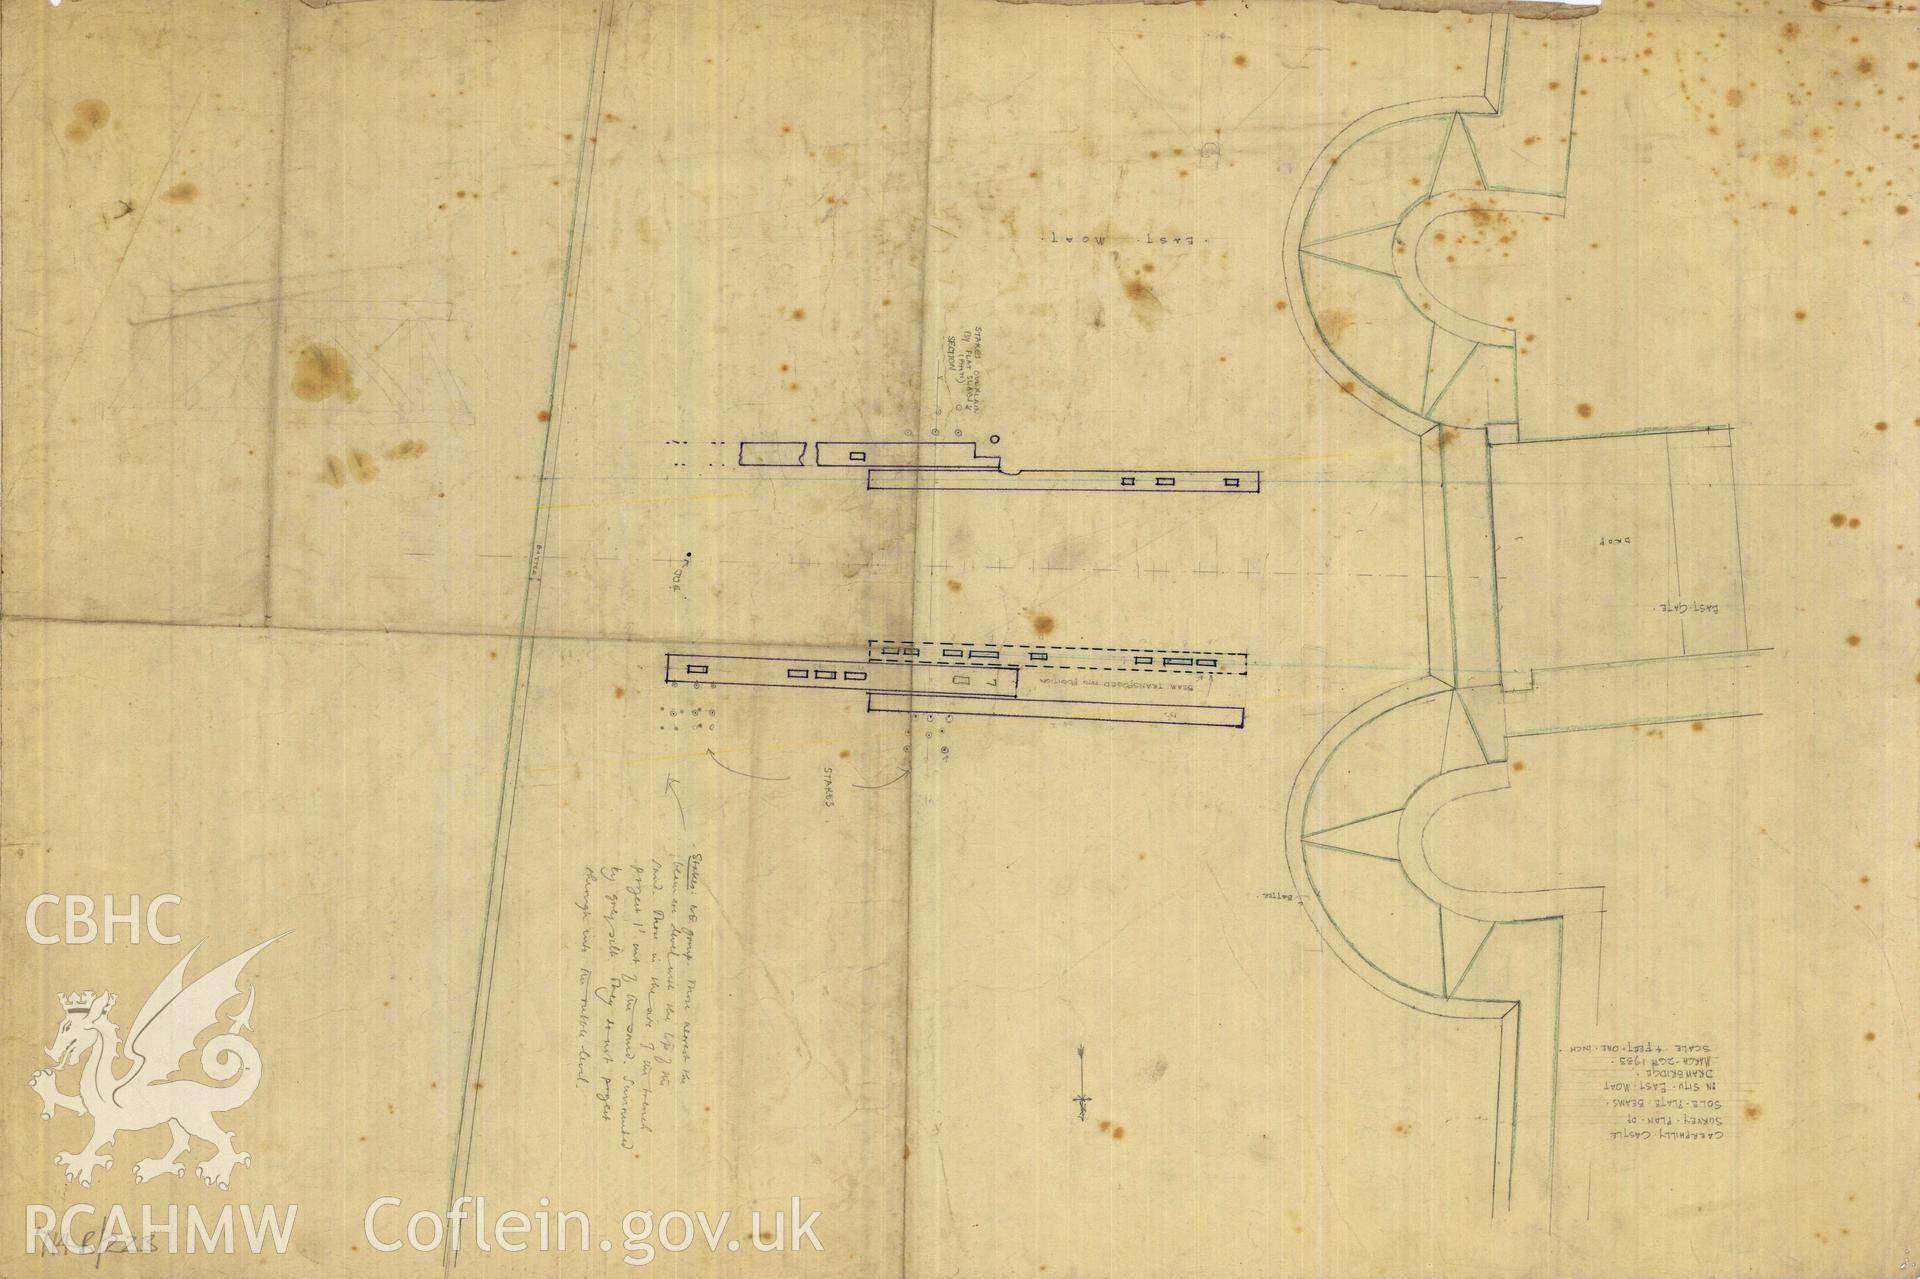 Cadw guardianship monument drawing of Caerphilly Castle. Mid W gate, timber bridge rems. Cadw Ref. No:714B/223. Scale 1:48.